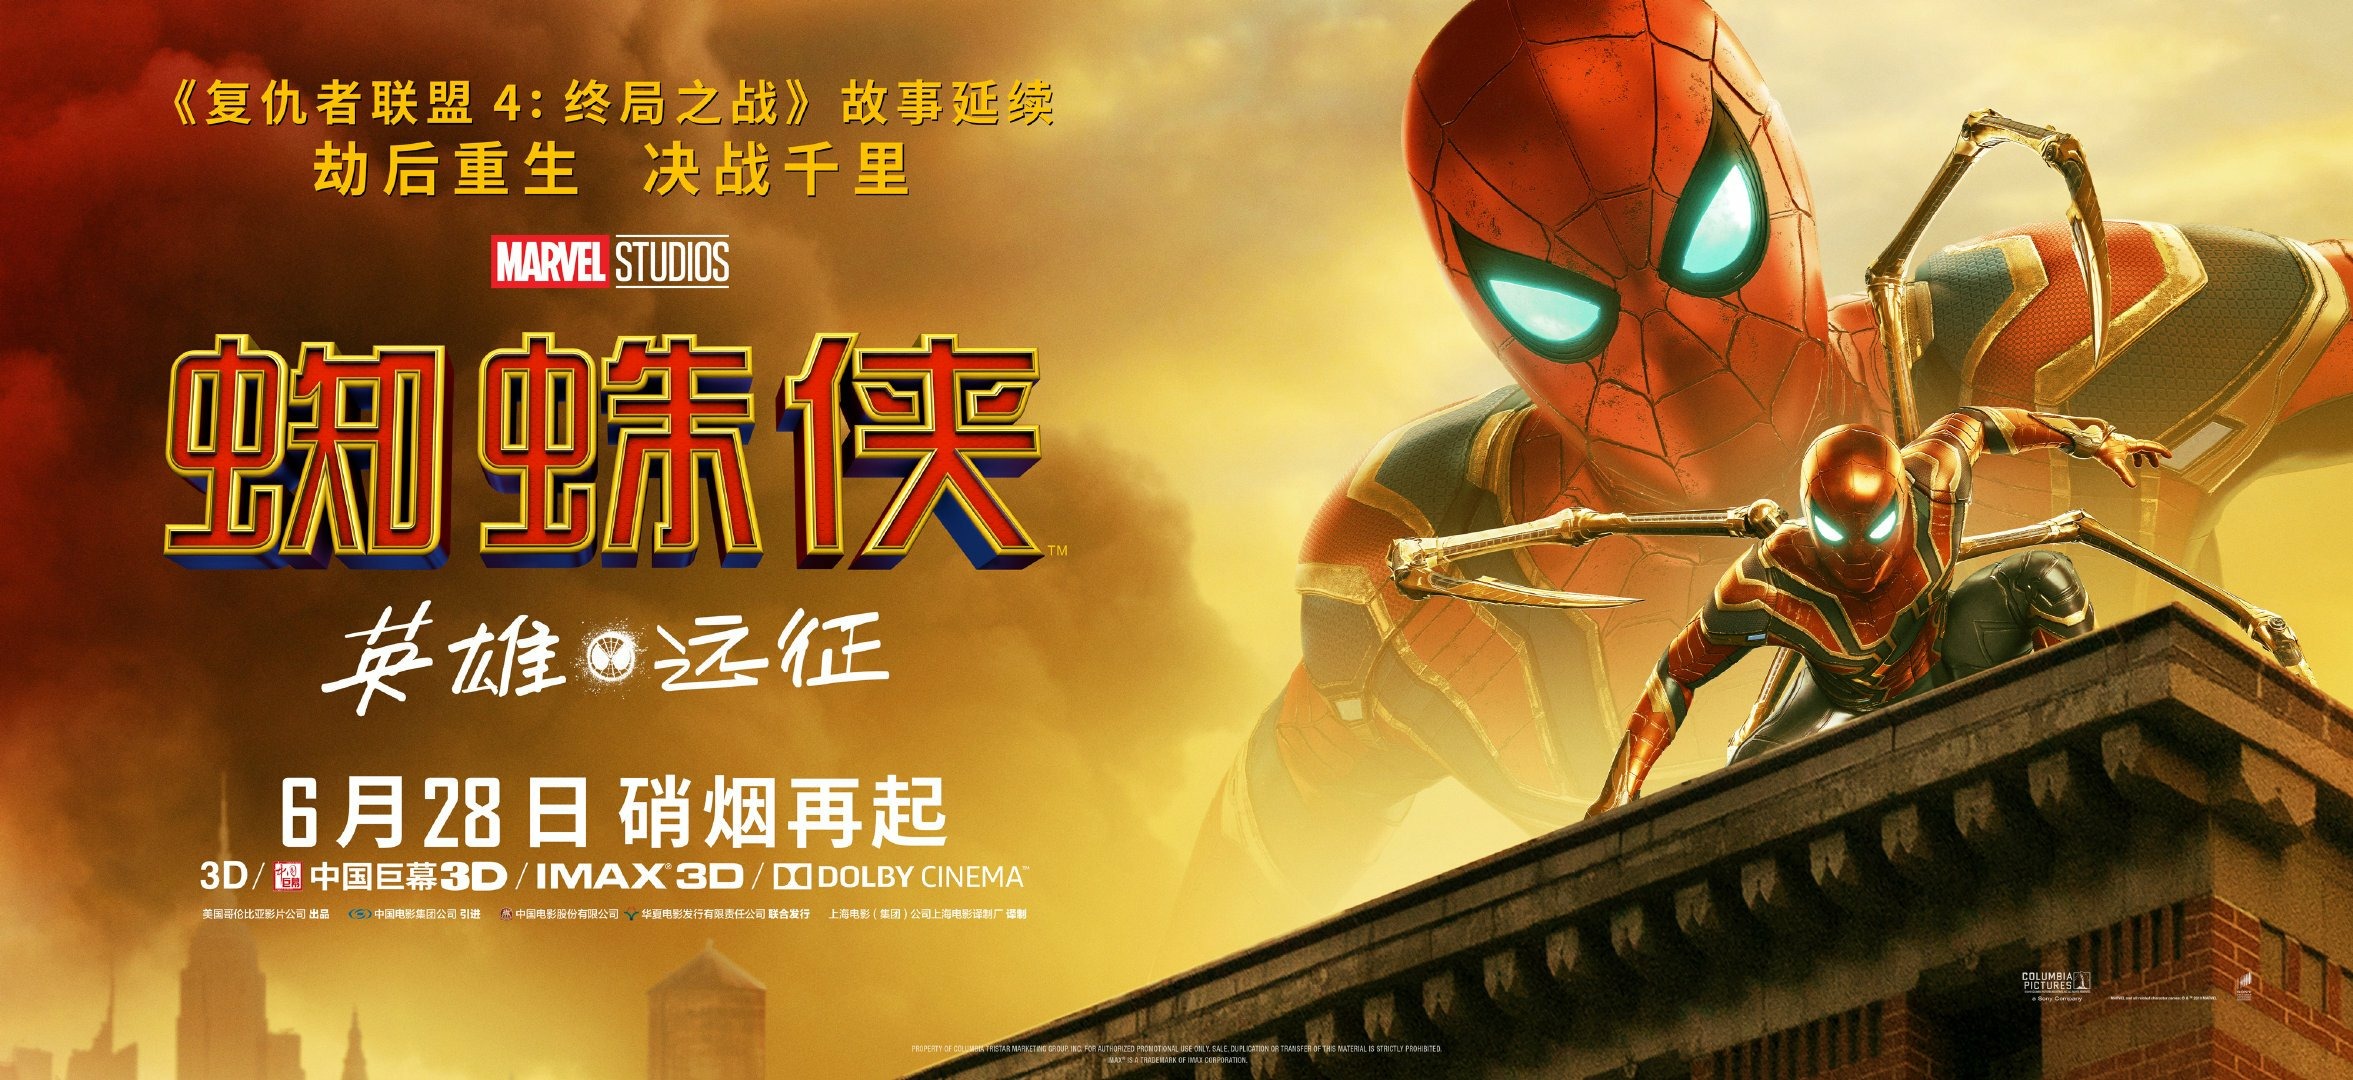 Mega Sized Movie Poster Image for Spider-Man: Far From Home (#15 of 35)